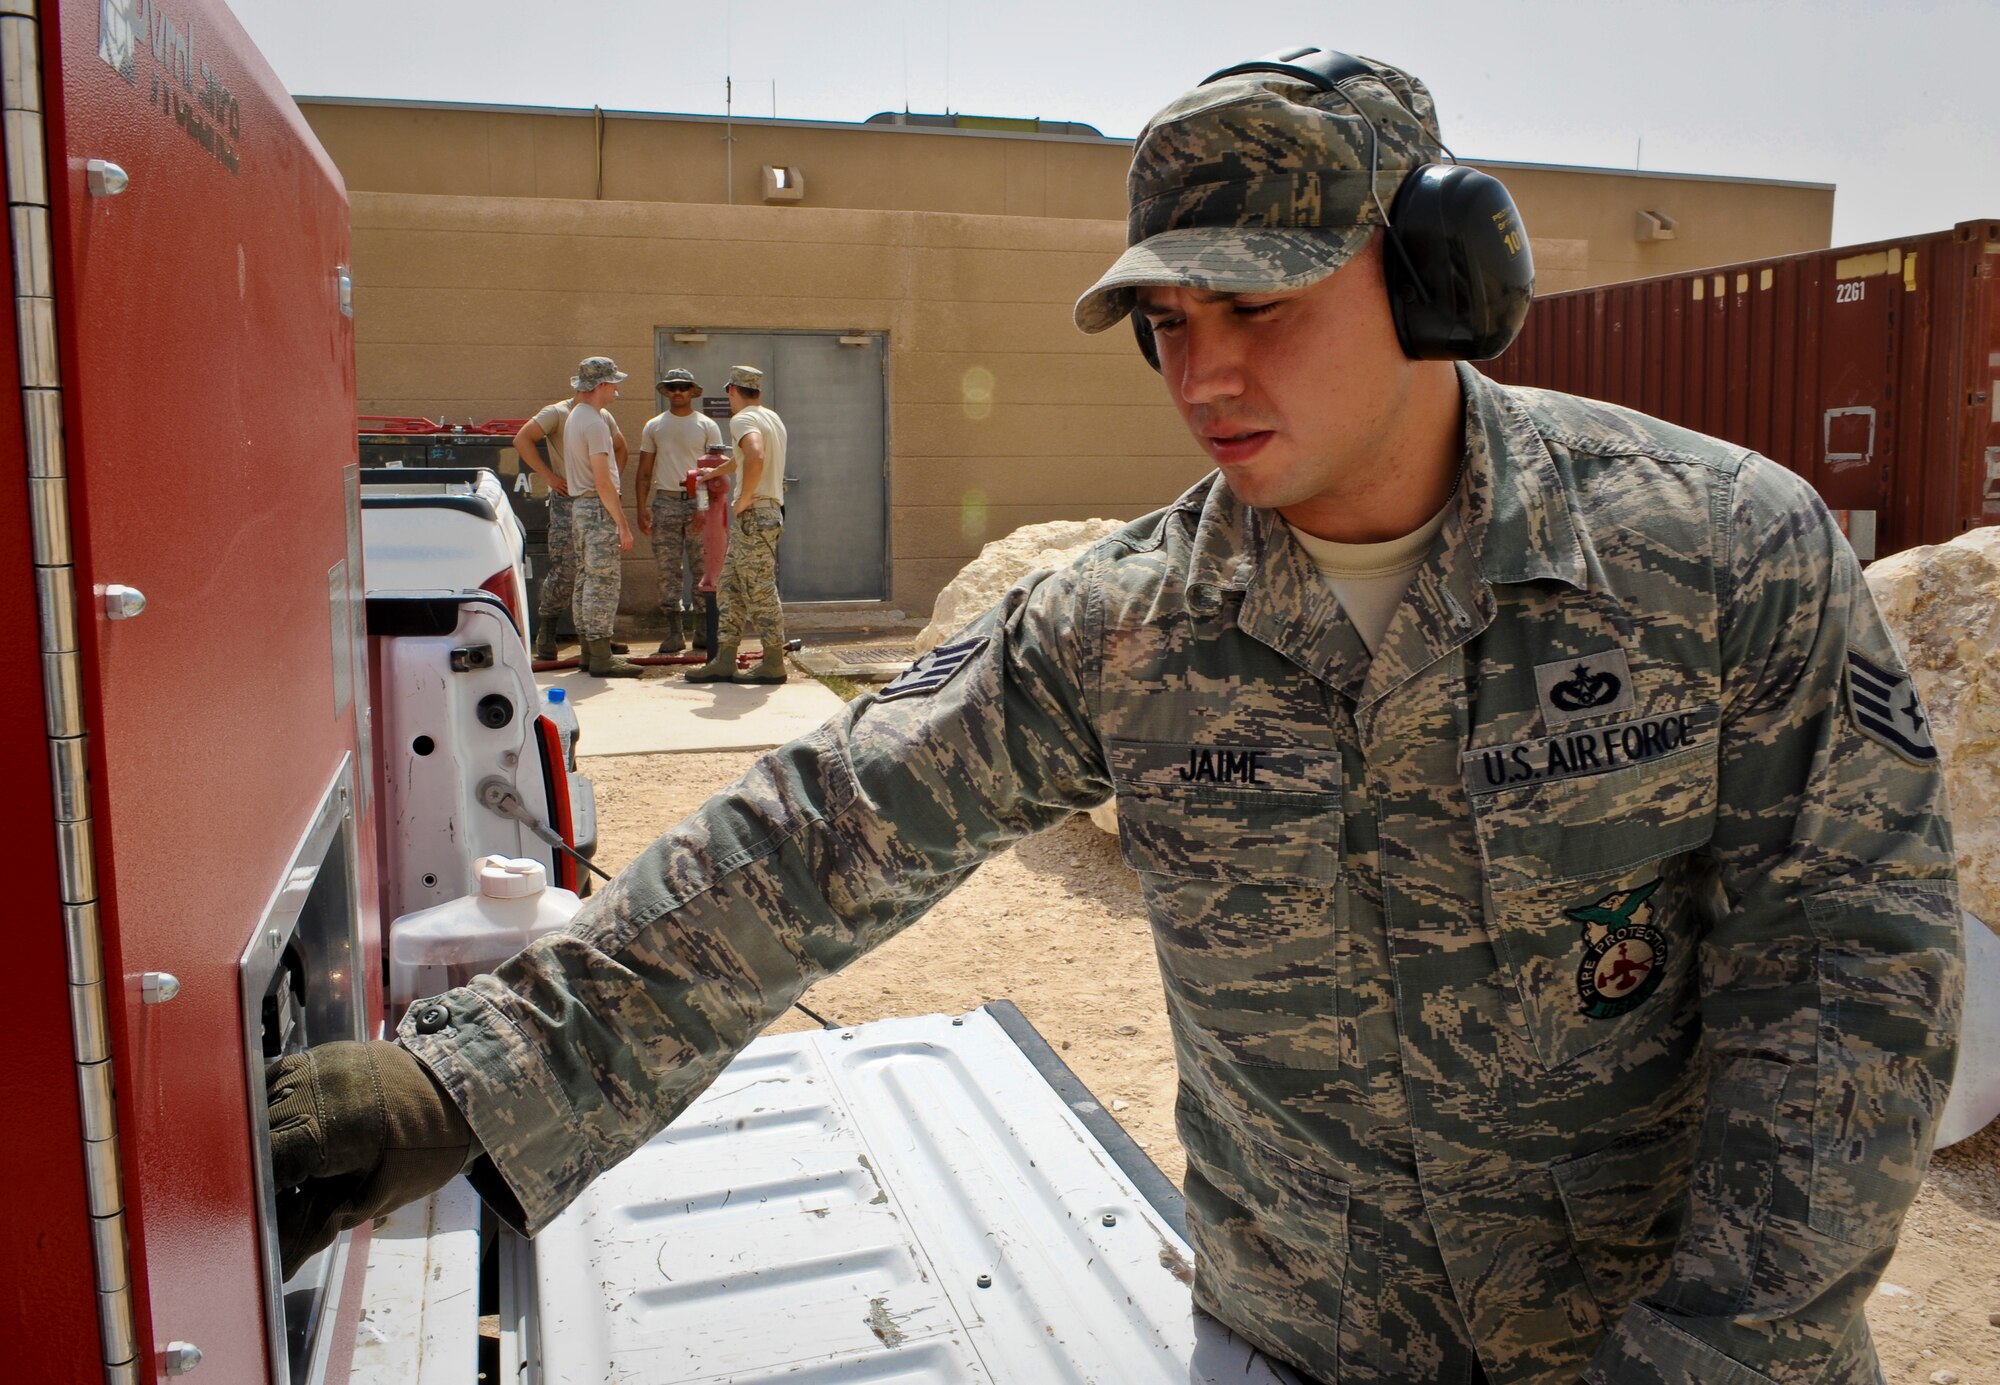 Staff Sgt. Kristopher Jaime operates the water tank and pump generator during training on the PyroLance, June 4, 2013, at the 379th Air Expeditionary Wing in Southwest Asia. This tool gives crews access to engine bays, cabins, cargo holds or anywhere else fire breaks out. Jaime is a 379th Expeditionary Civil Engineer Squadron firefighter. (U.S. Air Force photo/Senior Airman Benjamin Stratton)